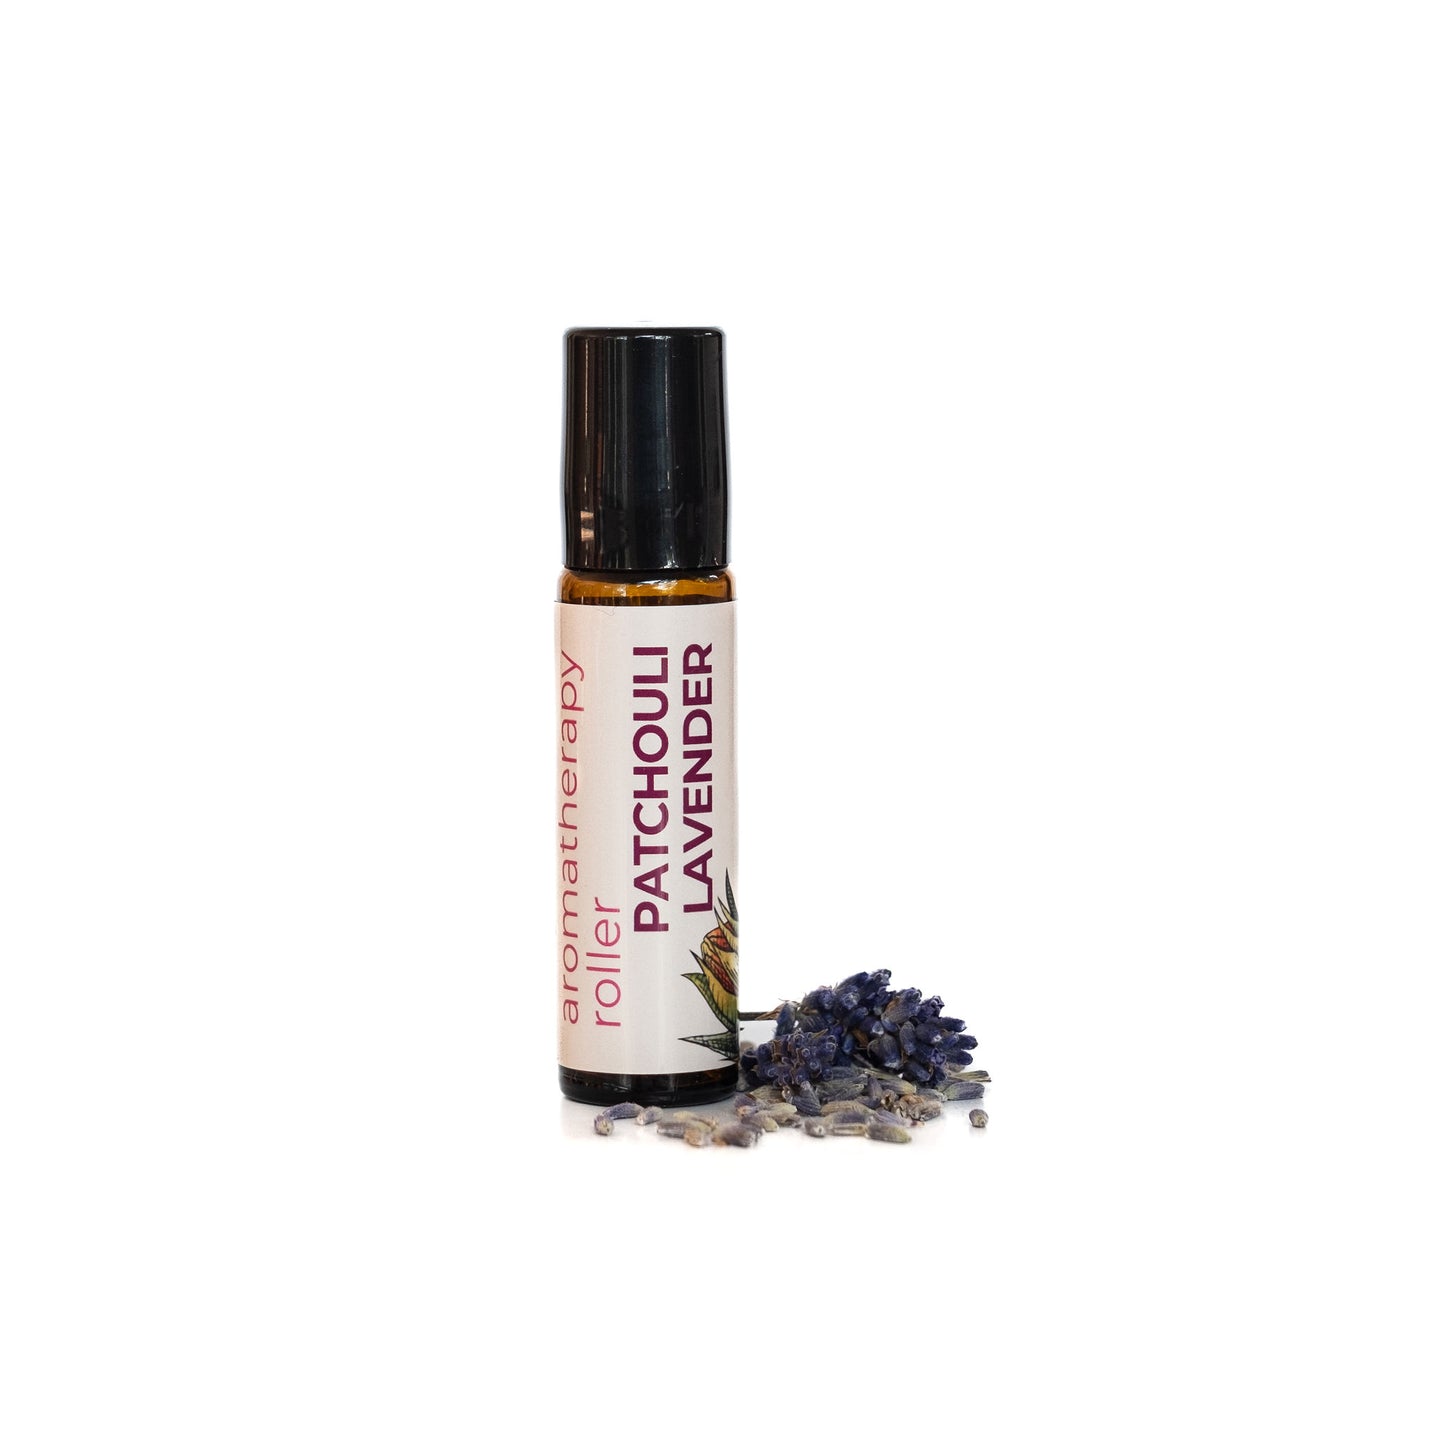 Lavender Patchouli Aromatherapy Roller for an earthy scent on the go | All Y'all Skincare